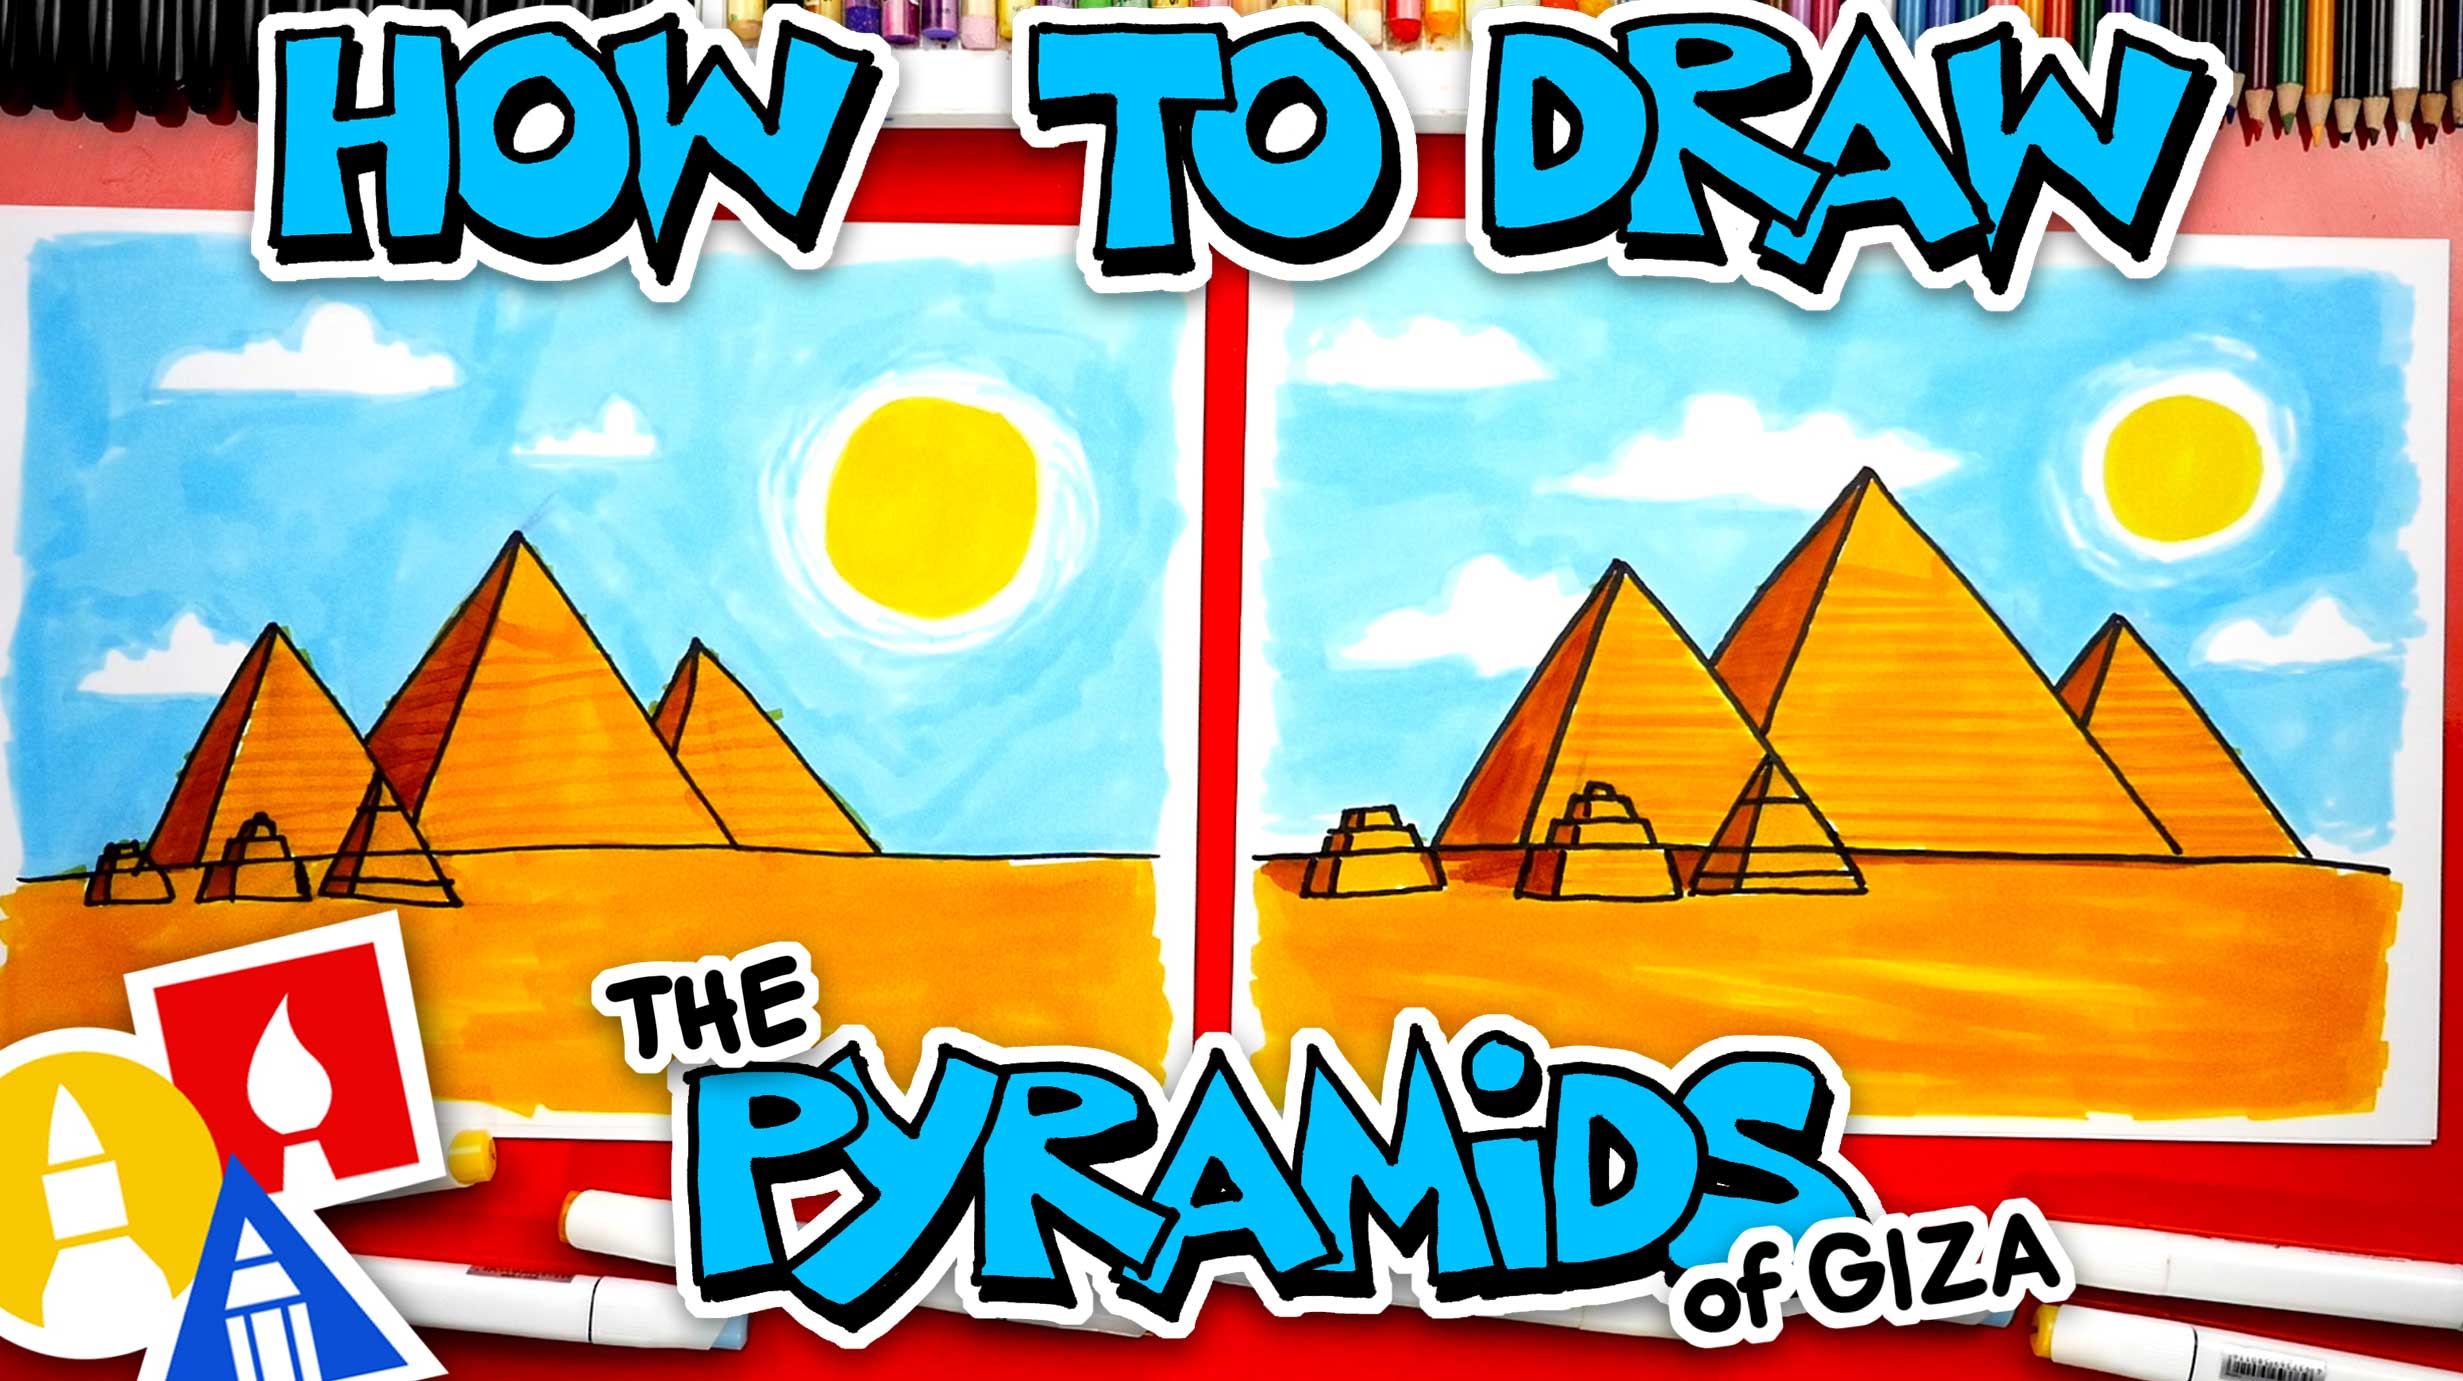 47 Great pyramid of giza in art Images: PICRYL - Public Domain Media Search  Engine Public Domain Search